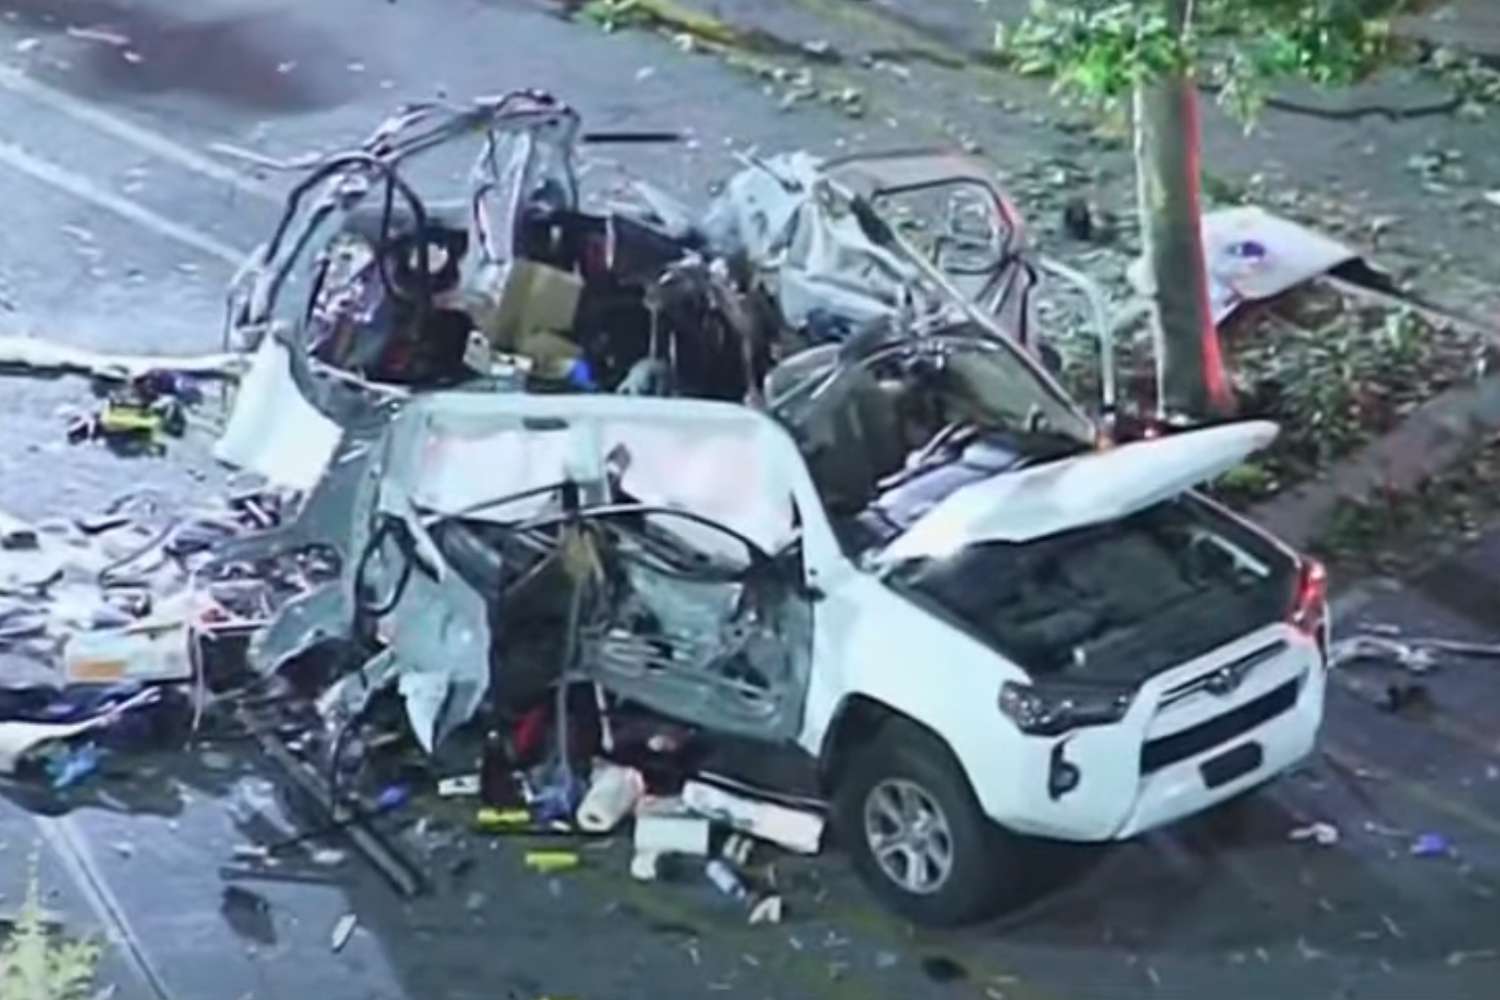 SUV Explodes in Supermarket Parking Lot After Man Lights Cigarette Near Propane Canisters